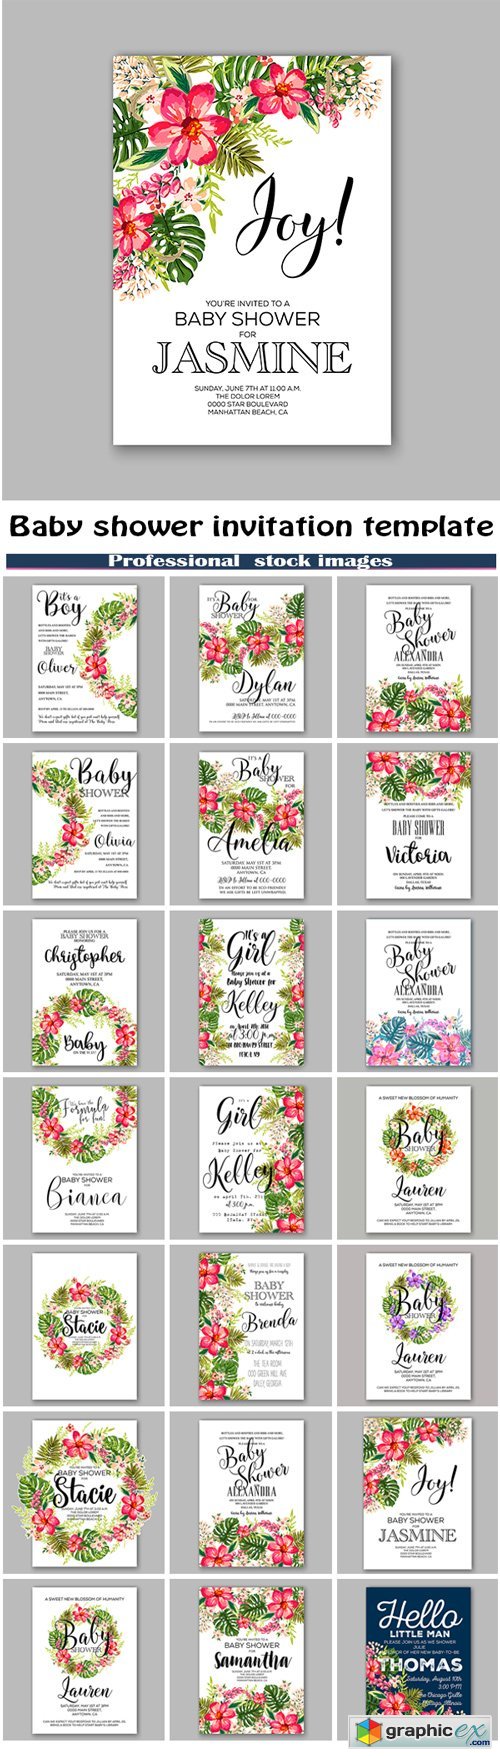 Baby shower invitation template with watercolor tropical flower